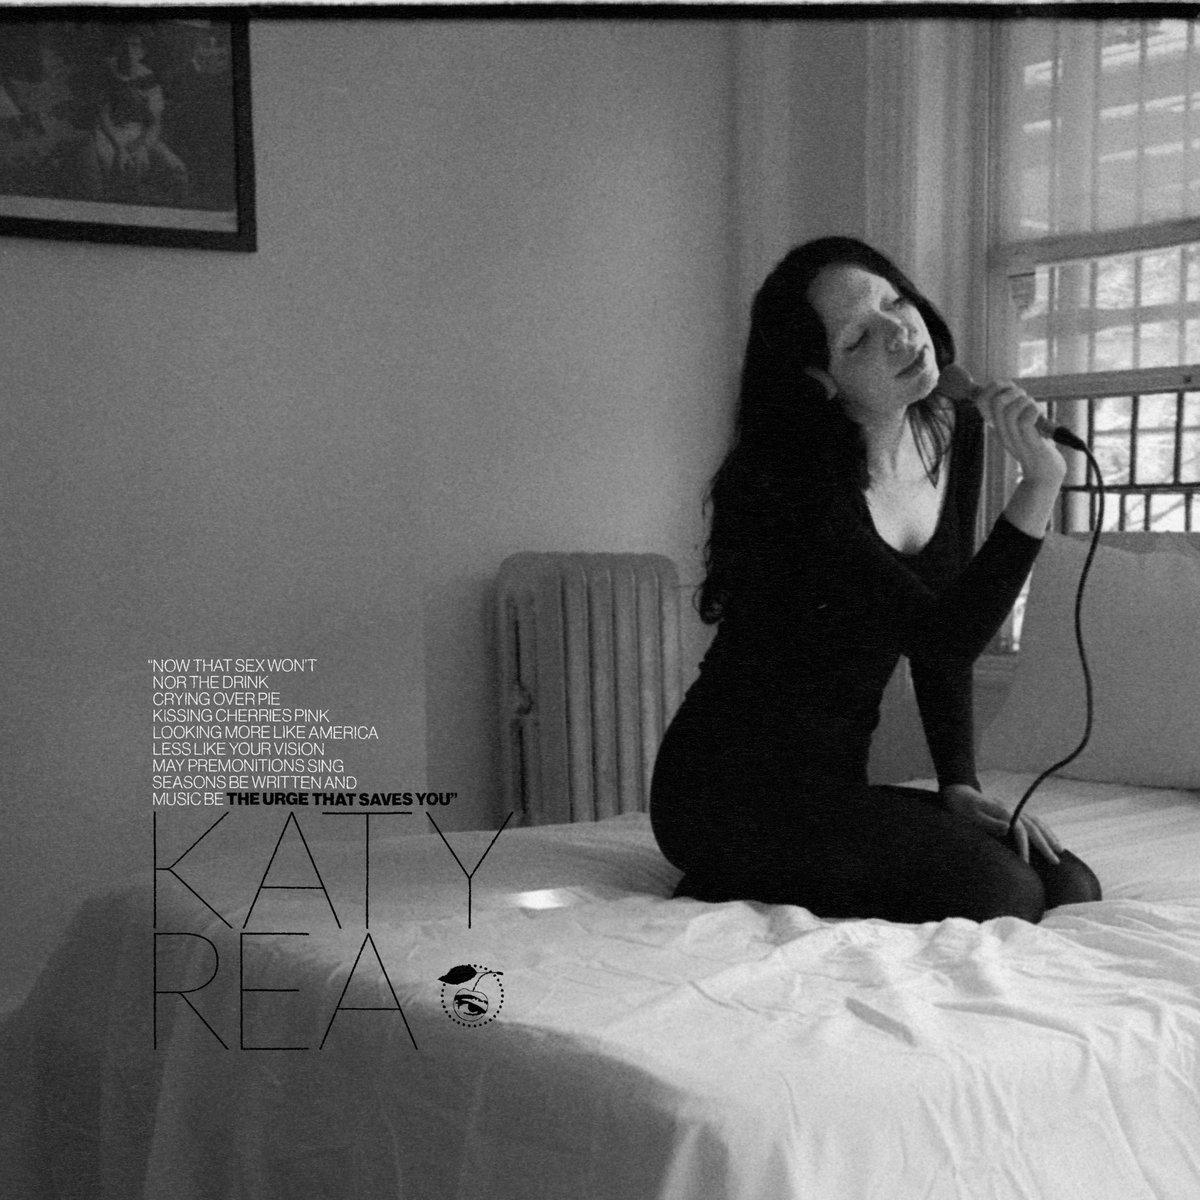 Katy Rea The Urge That Saves You album art - black and white photo of Katy Rea kneeling on a bed and singing into a microphone